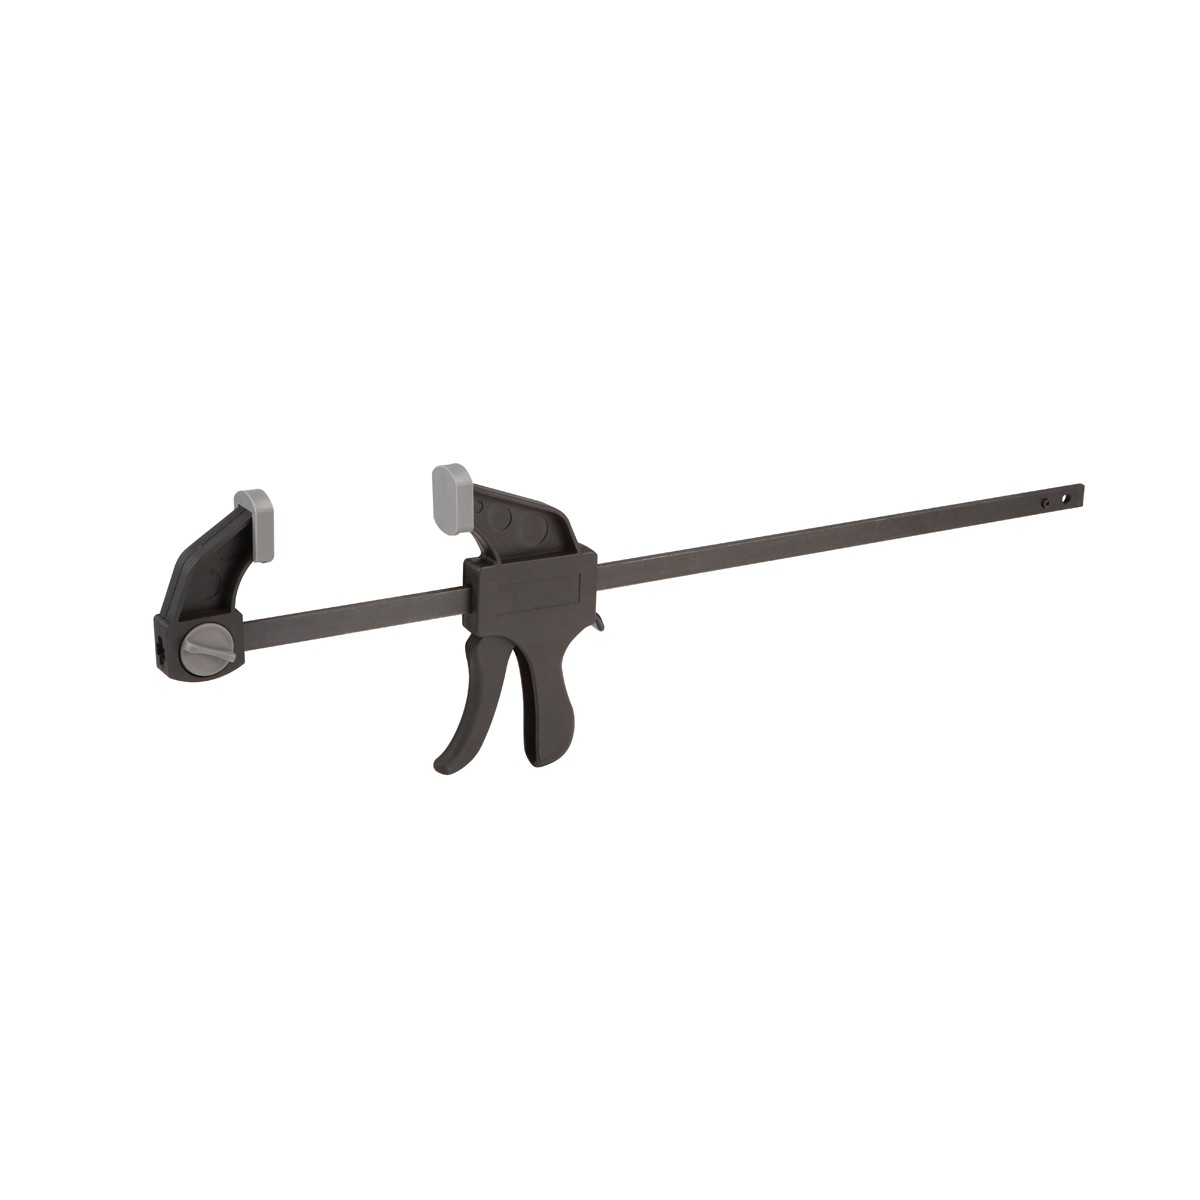 18 in. Ratcheting Bar Clamp/Spreader